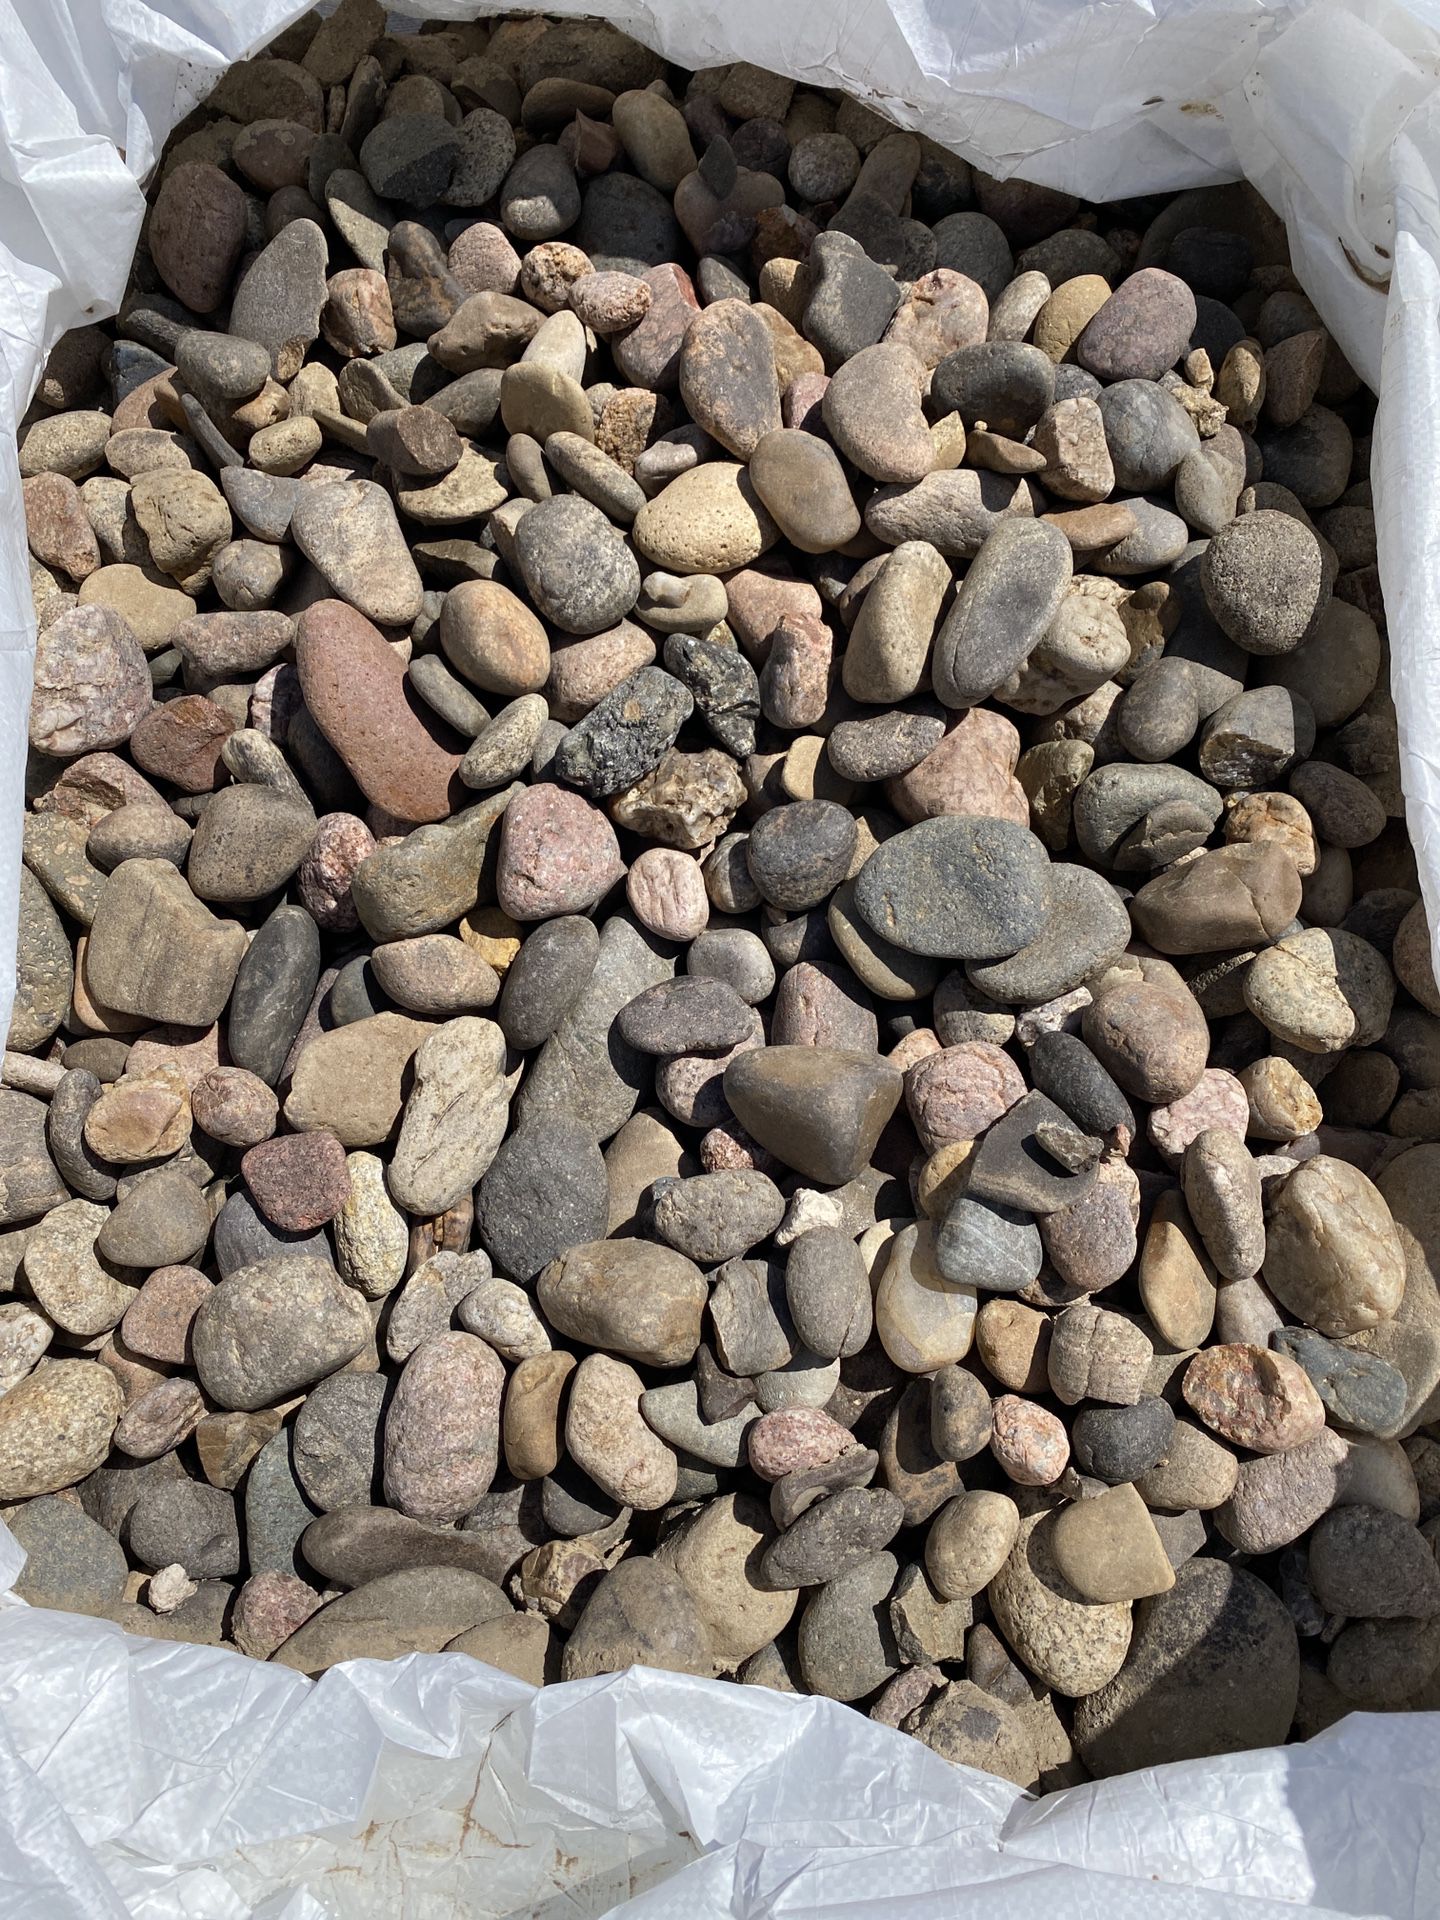 Decorative Kansas River Rock 1-4” Delivery Available